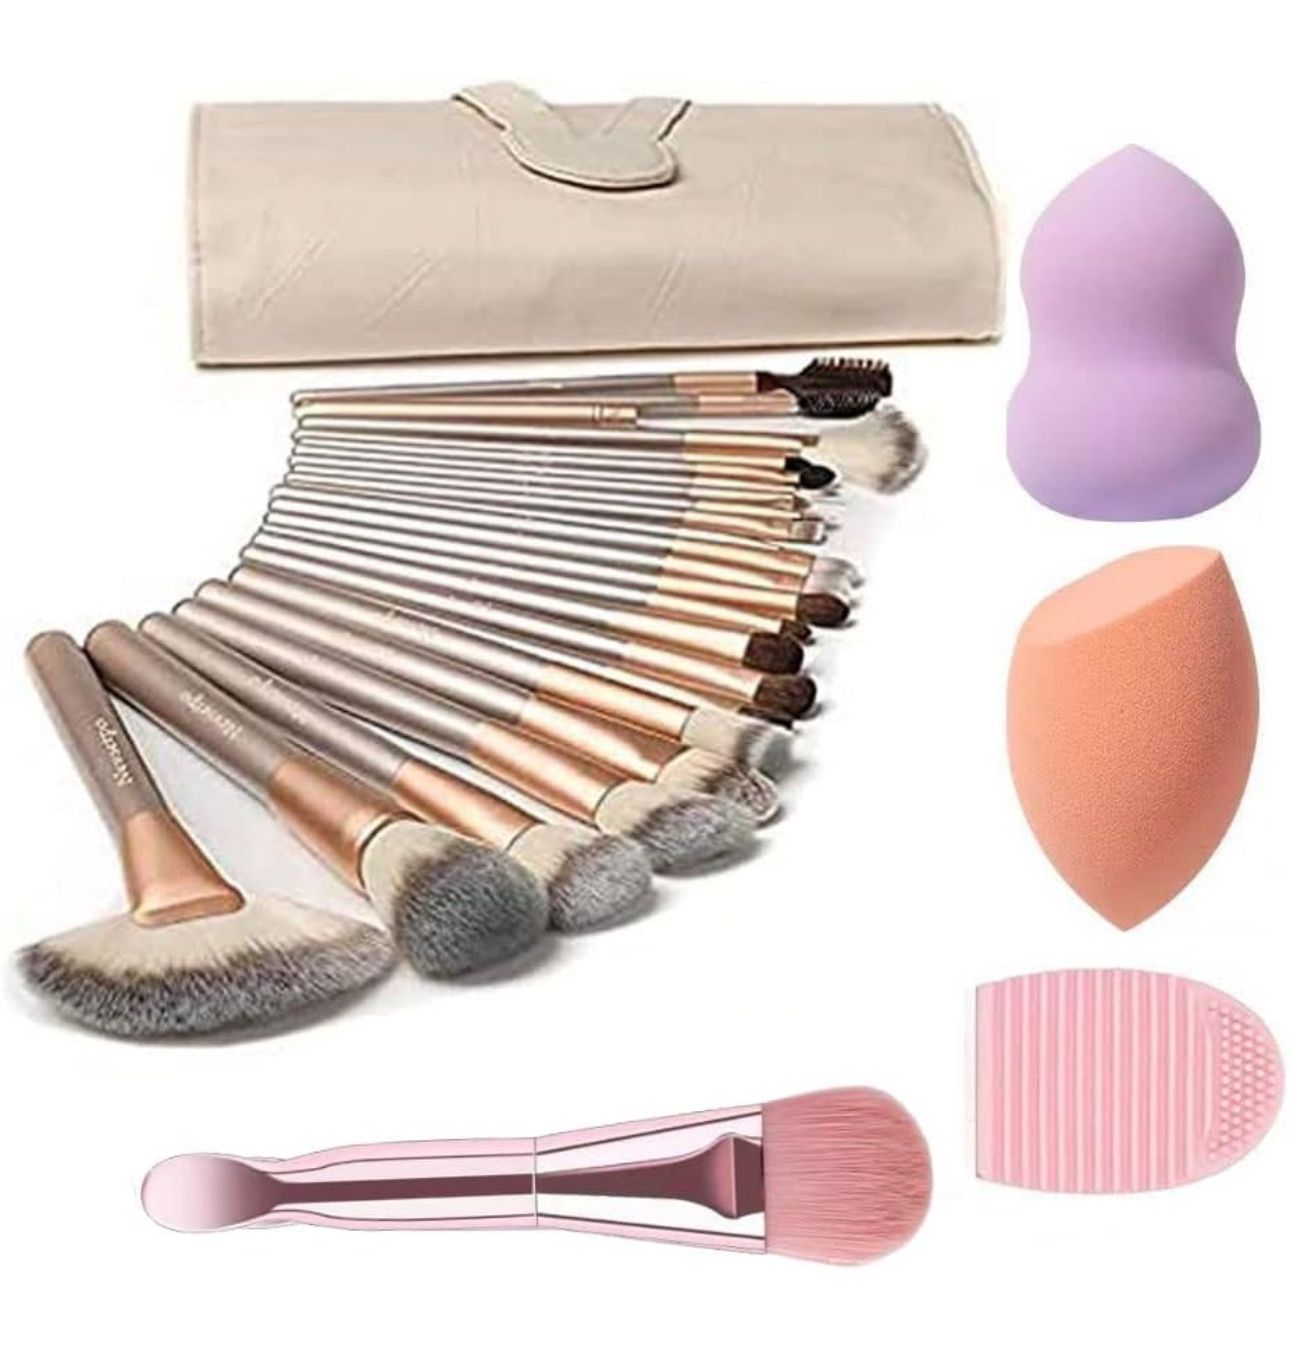 New: 24 Pcs Full Face Makeup Set with Beauty Blenders, brush cleaner, fold-up carrying case